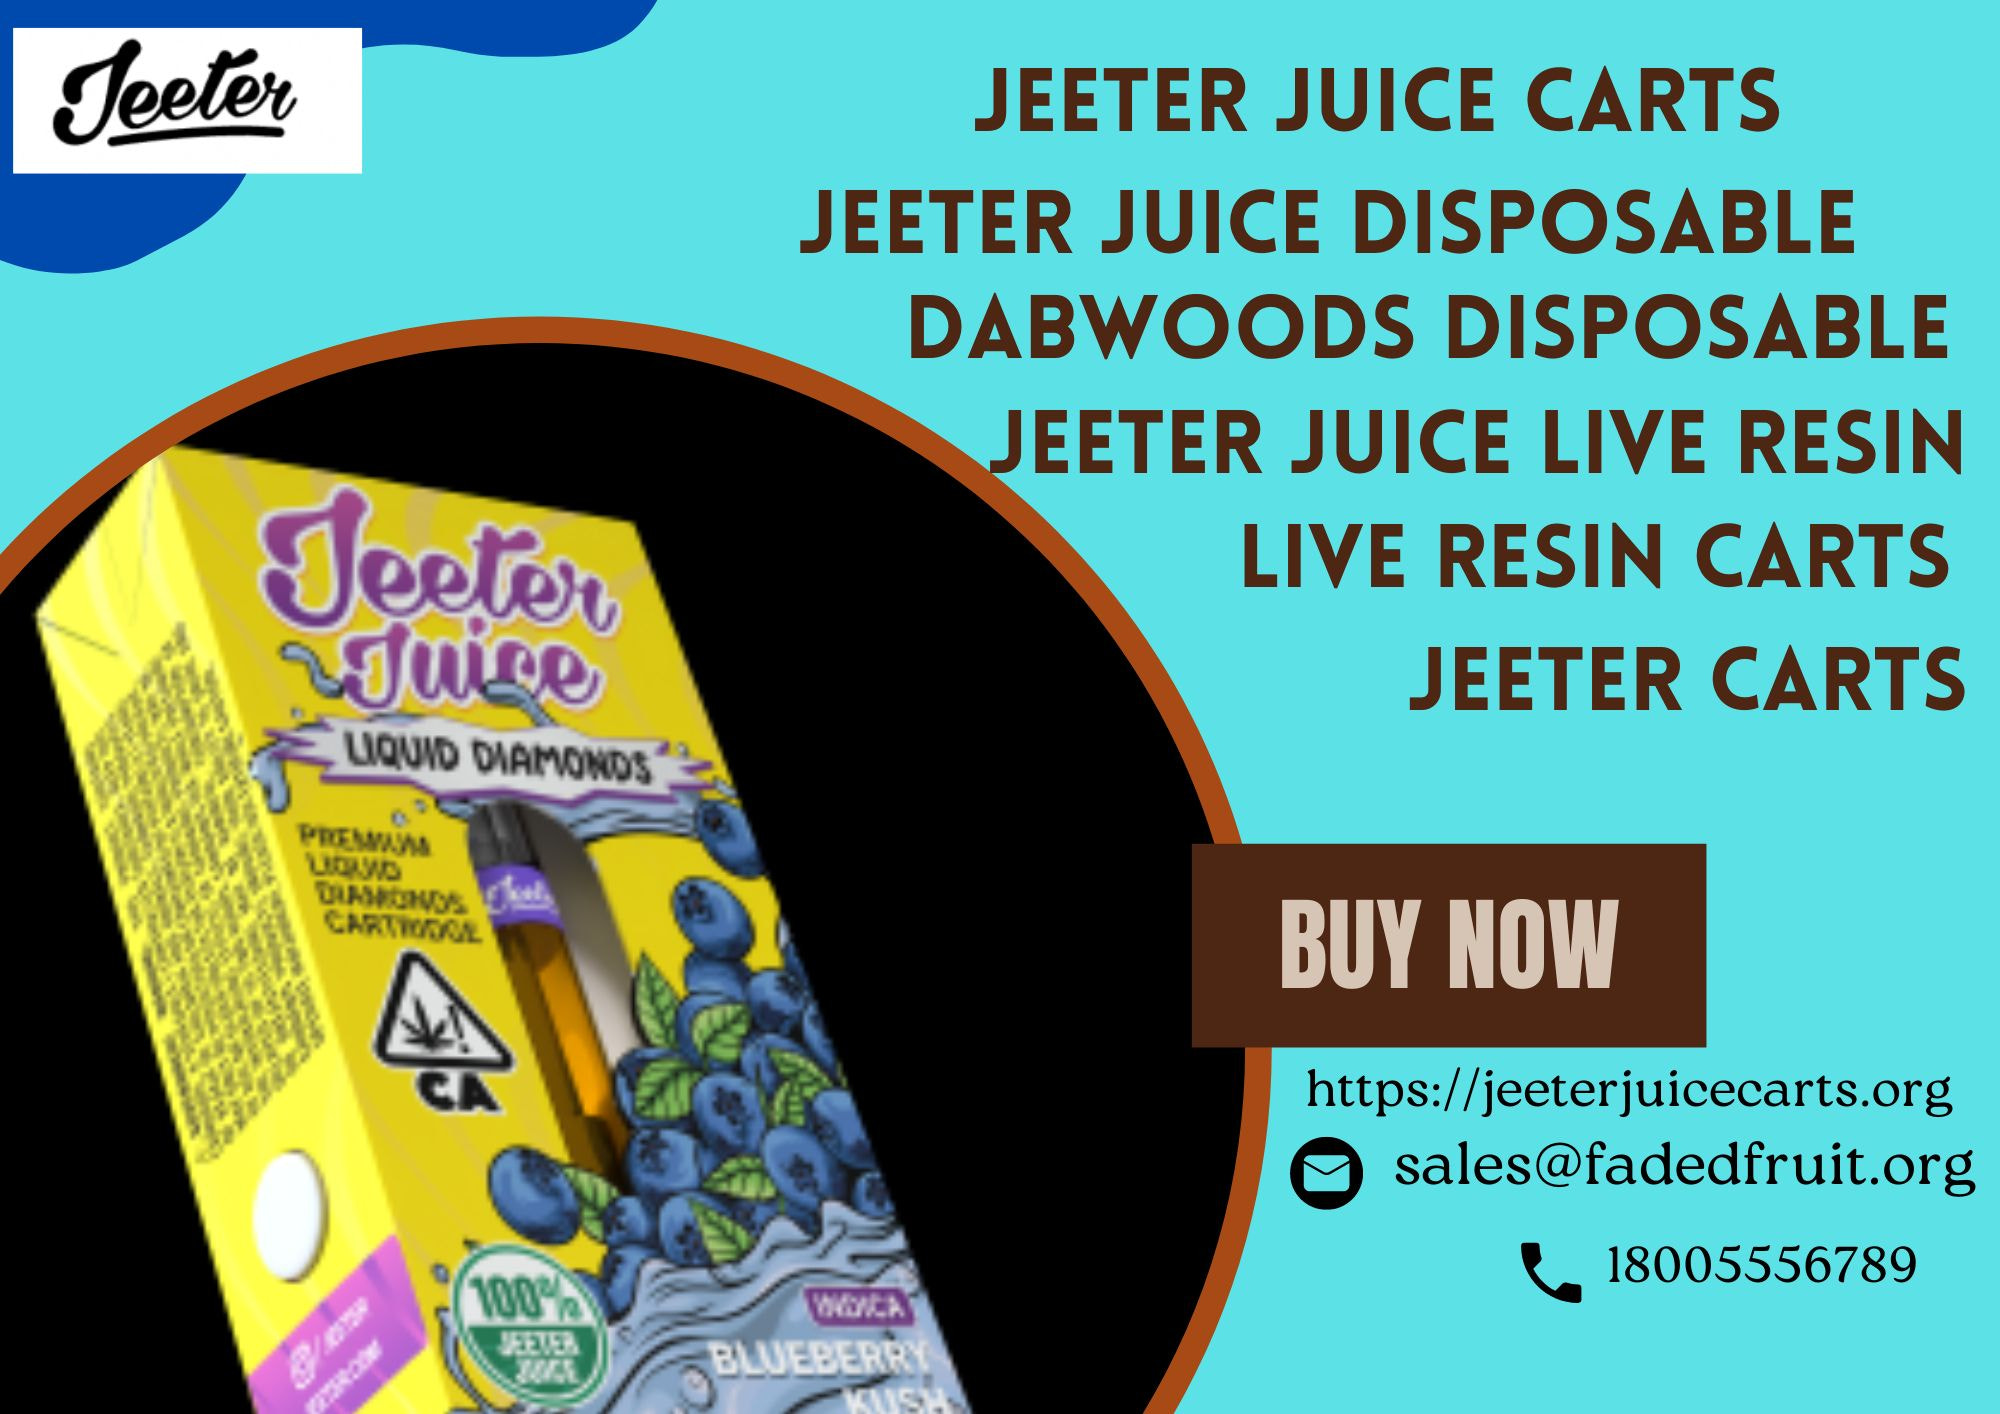 Jeeter juice disposable